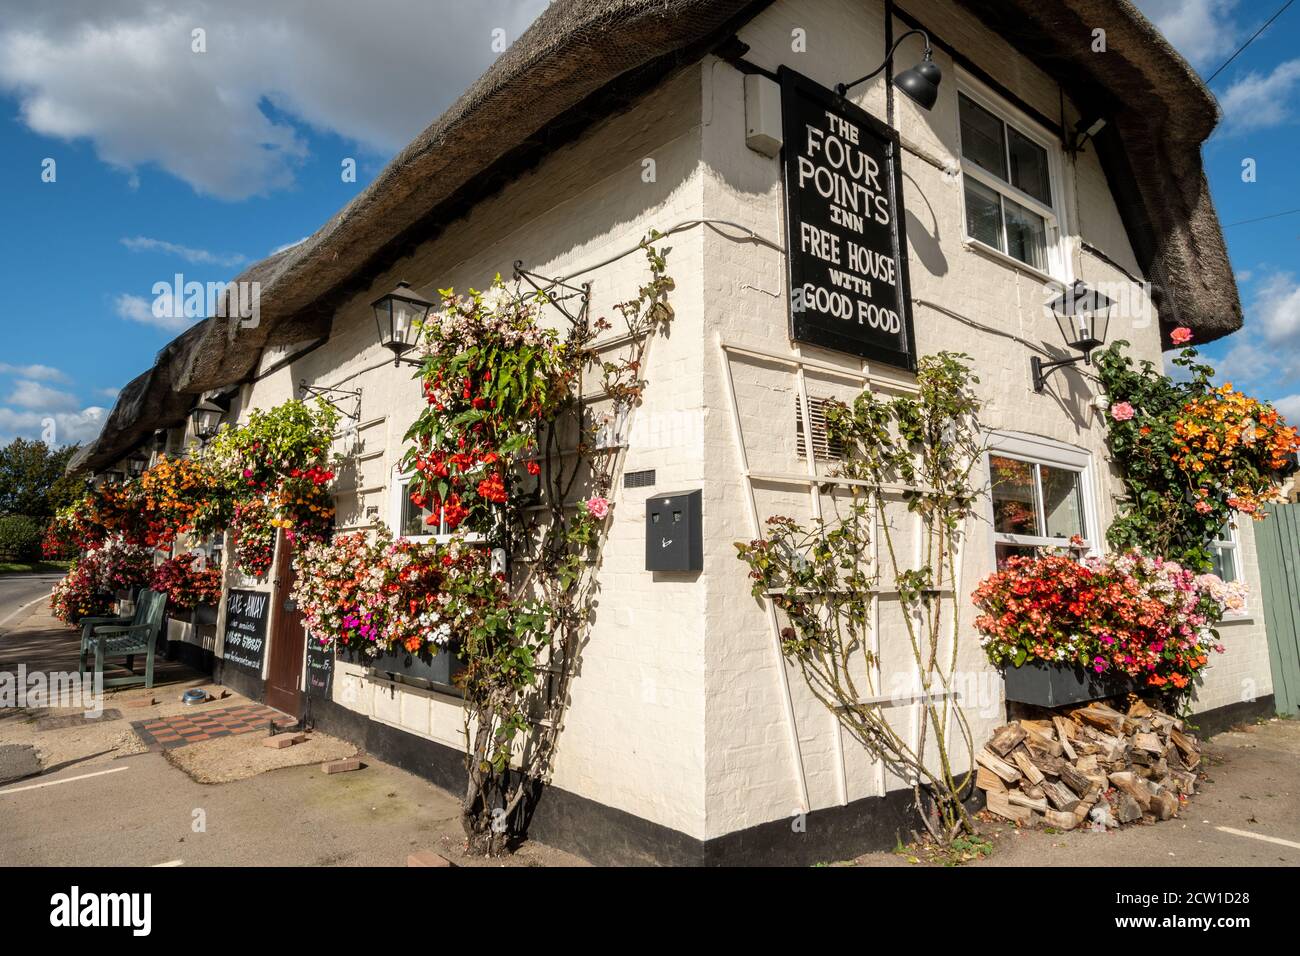 The Four Points Inn, a village pub and restaurant in Aldworth, Berkshire, UK. Exterior of the public house decorated with flowers and hanging baskets Stock Photo